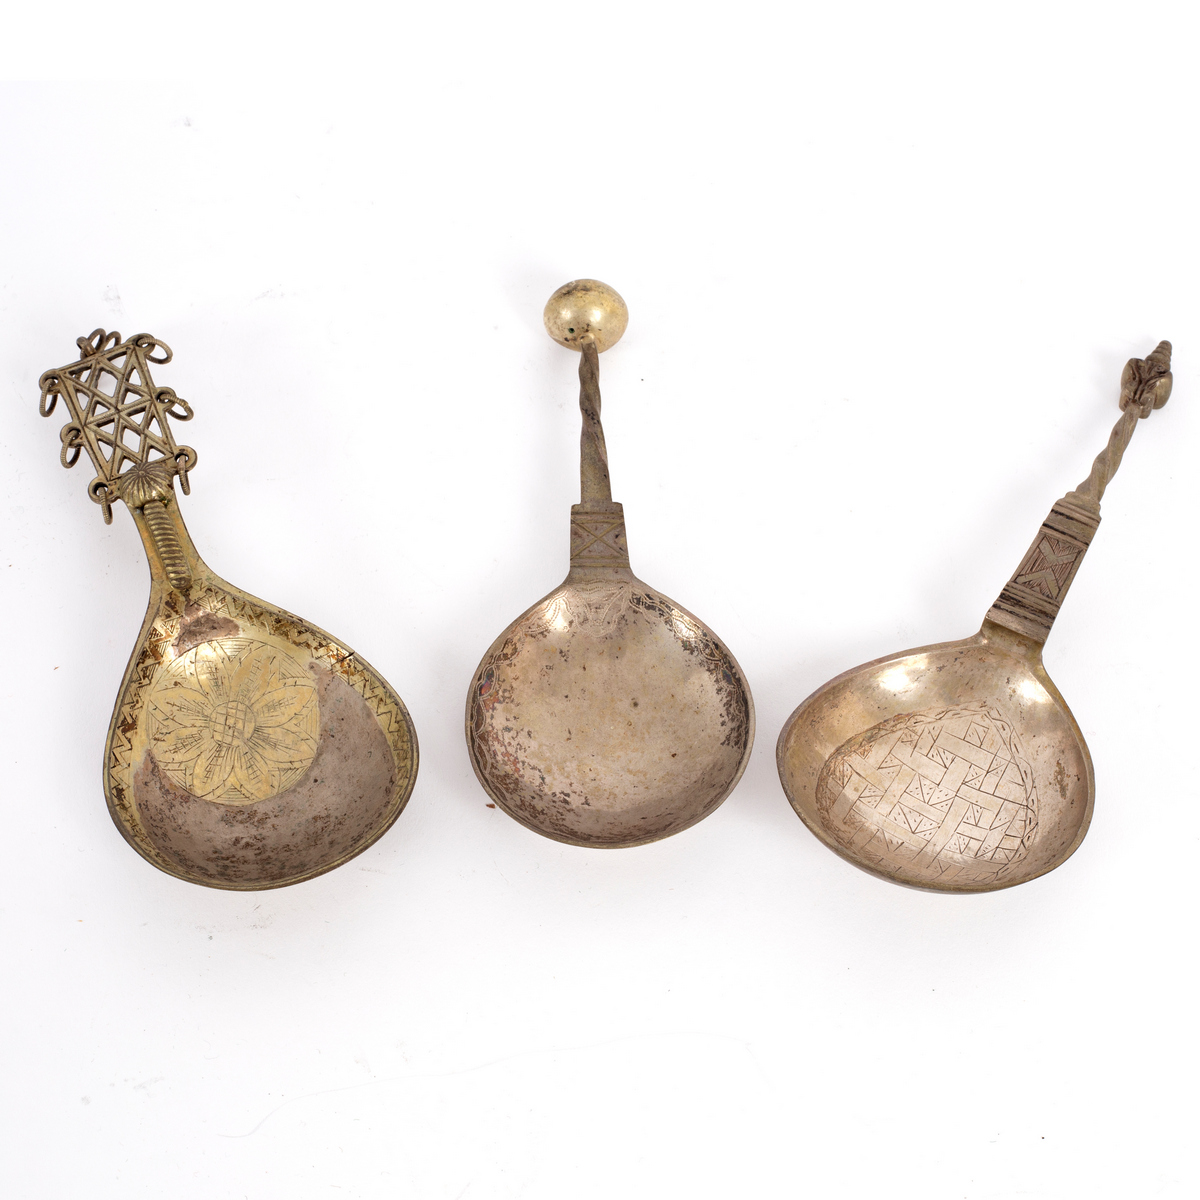 Three Norwegian spoons one HP Blytt of Bergen, circa 1750, the other two circa 1800,